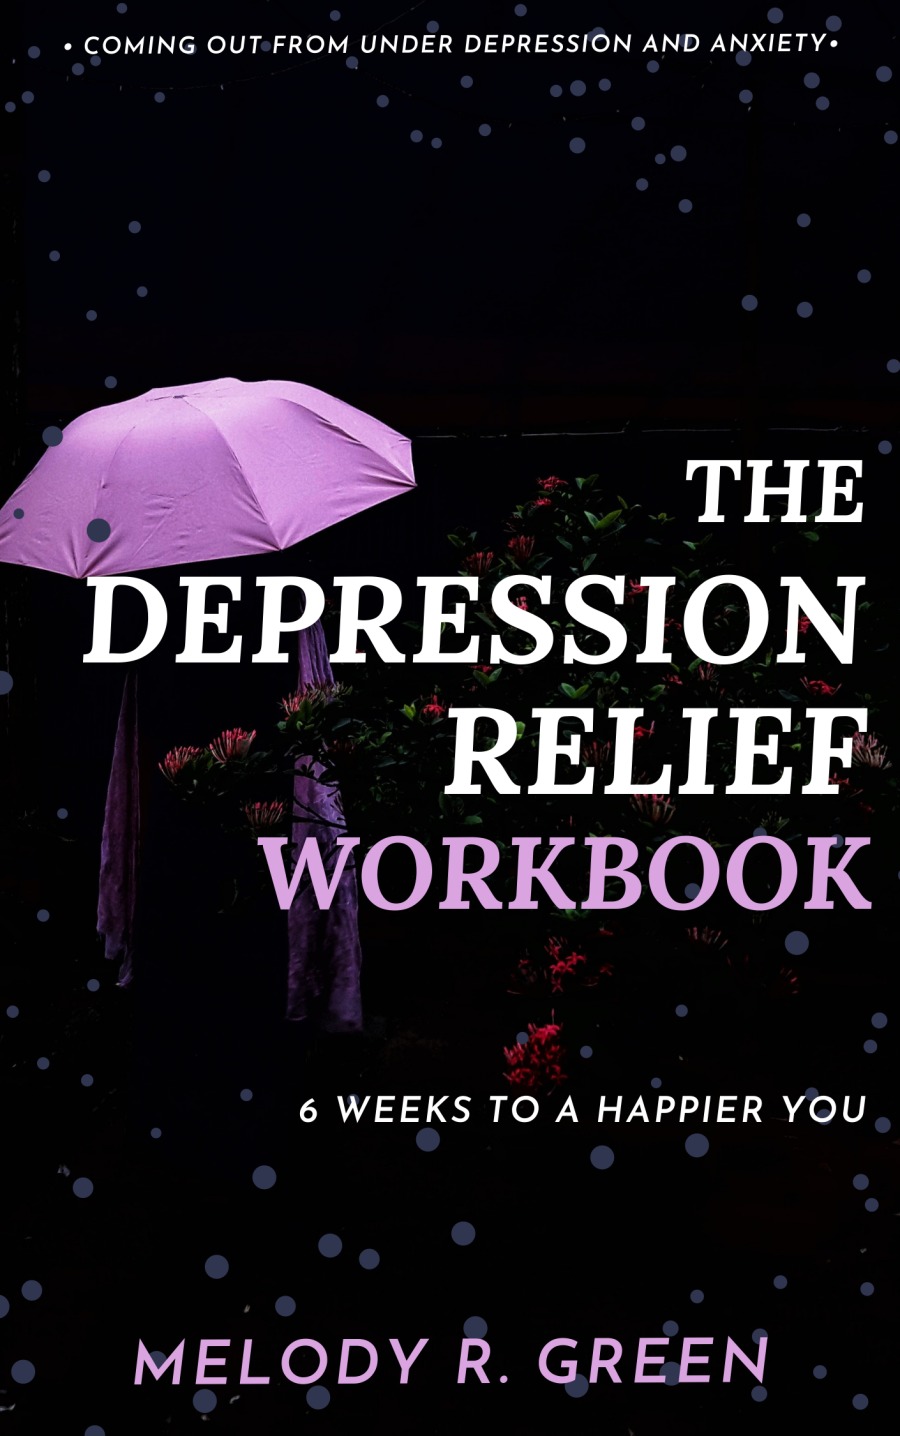 + COMING OUT-FROM UNDER DEPRESSION AND ANXIETY.

fe G0:
EPRESSION

3A)
WORKBOOK

  

6 WEEKS TO A HAPPIER YOU

MELODY R. GREEN